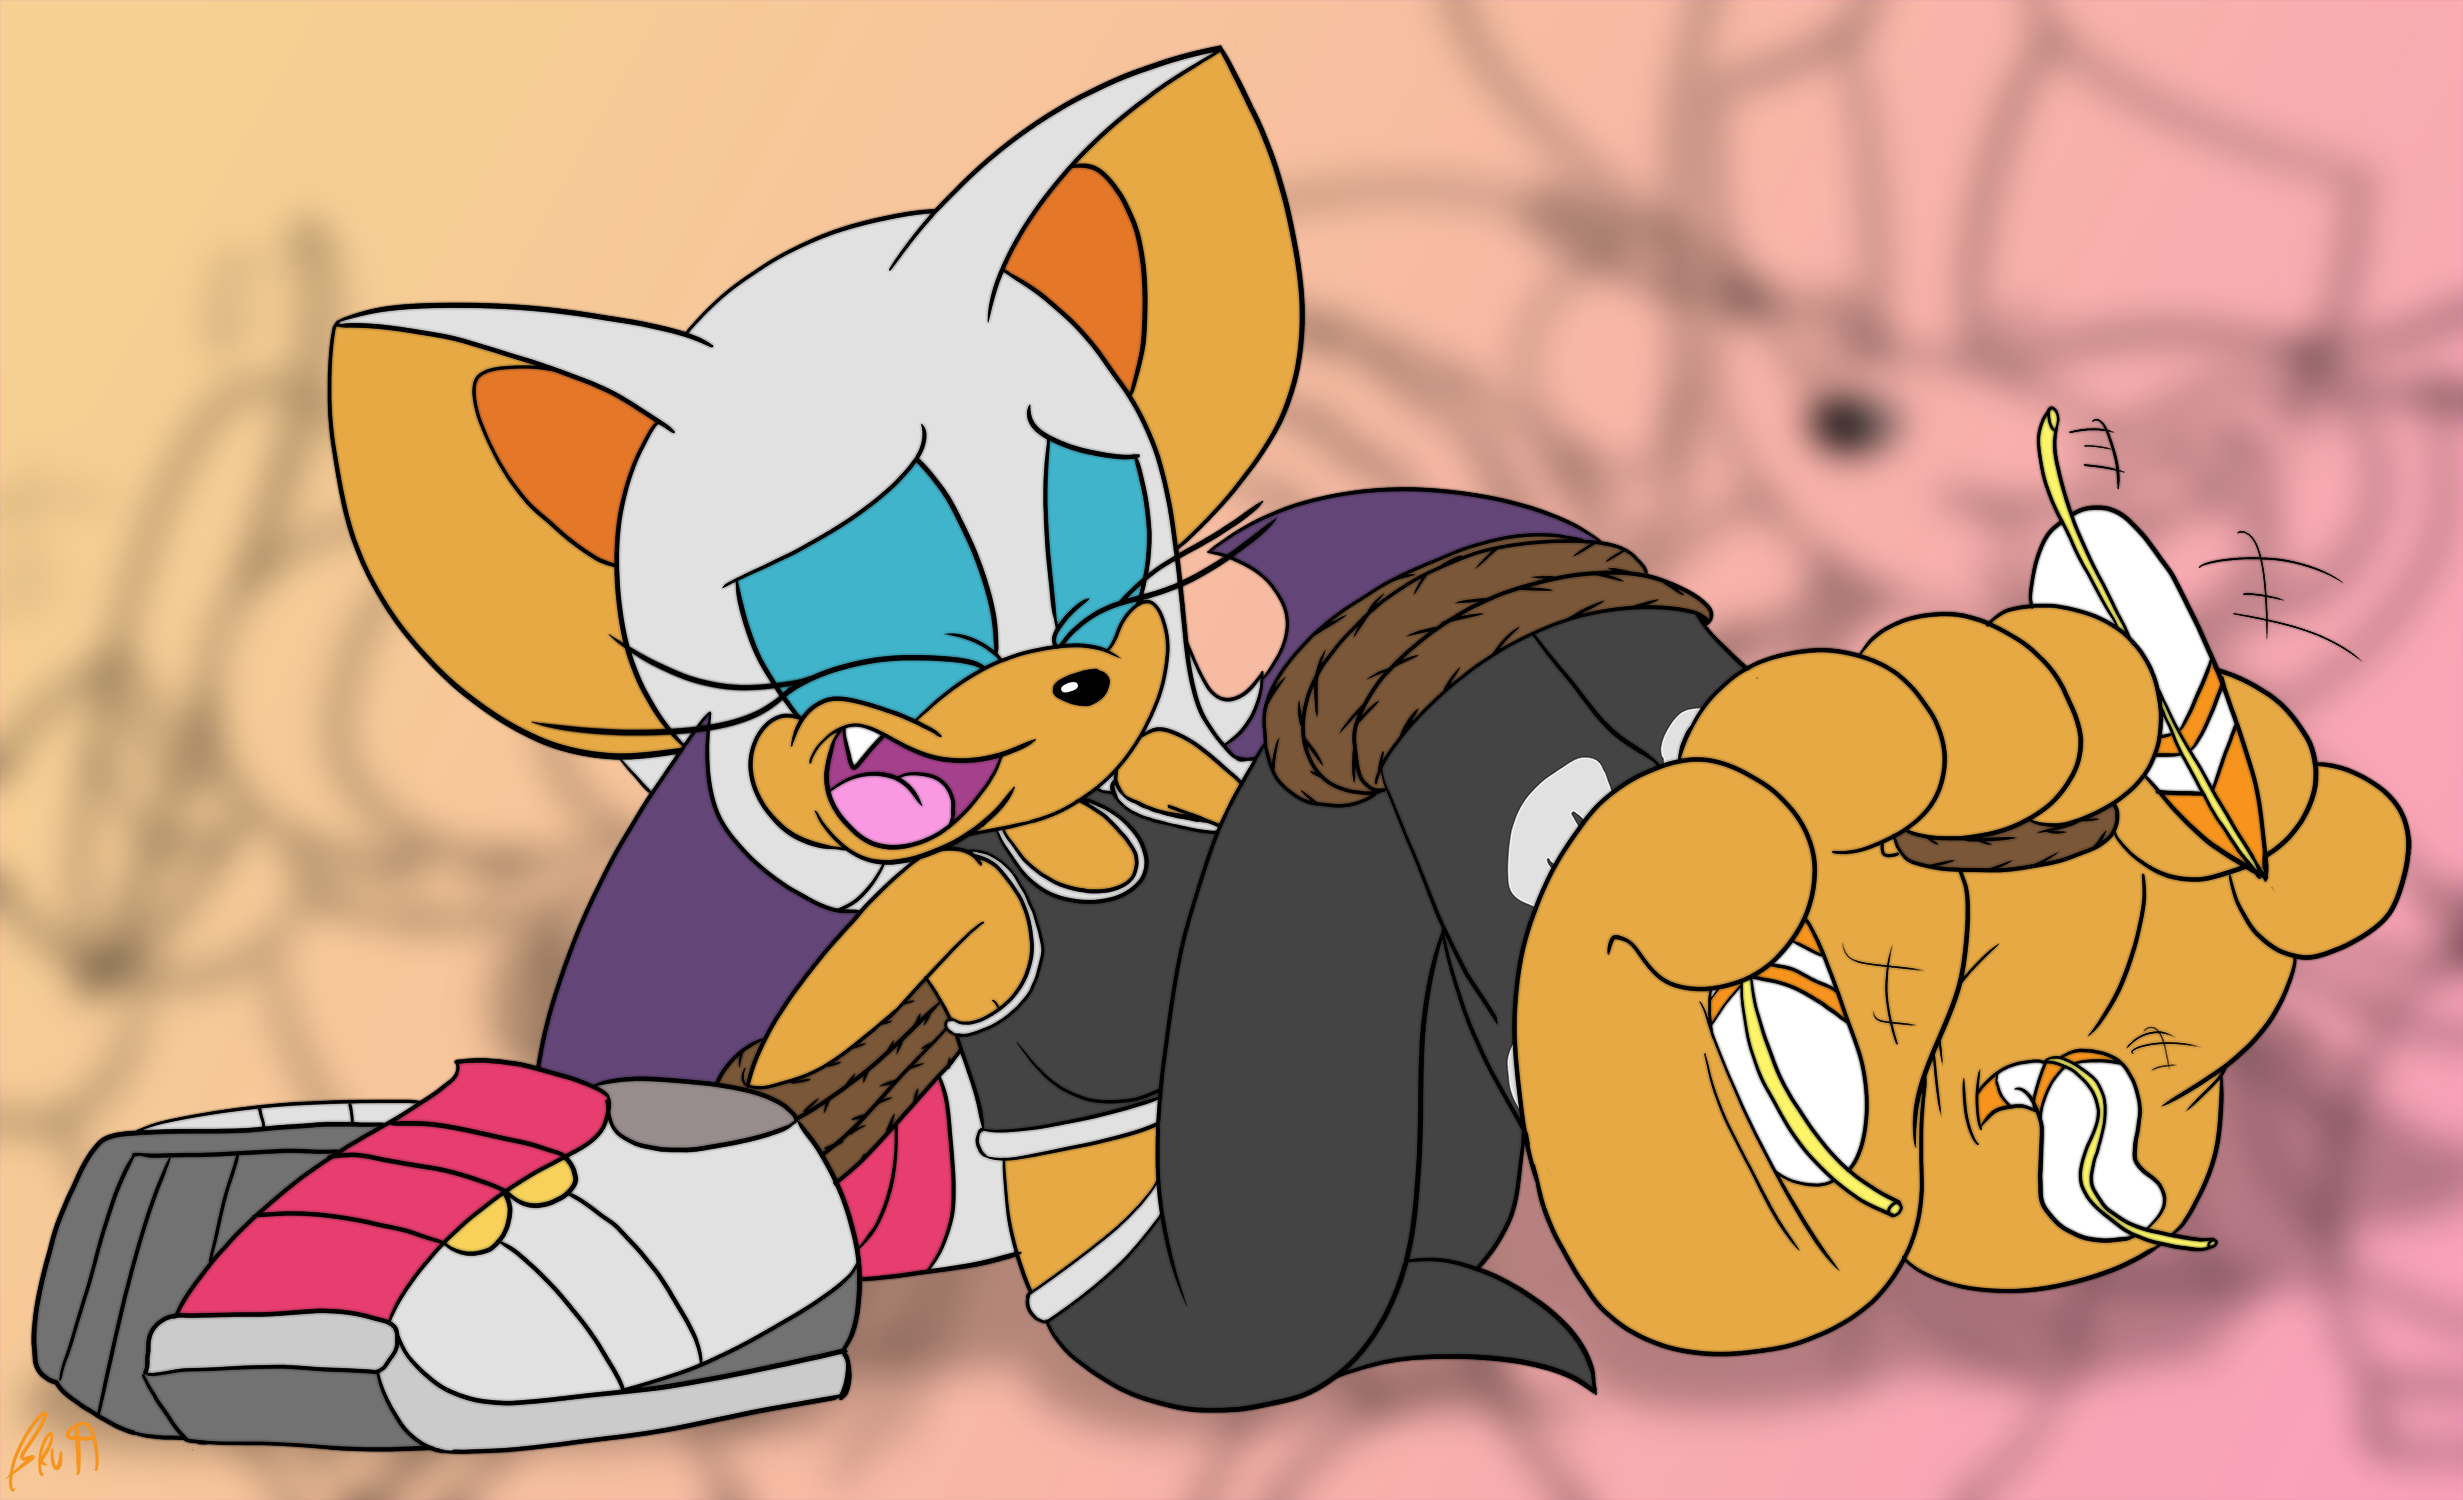 Rouge the bat tickled